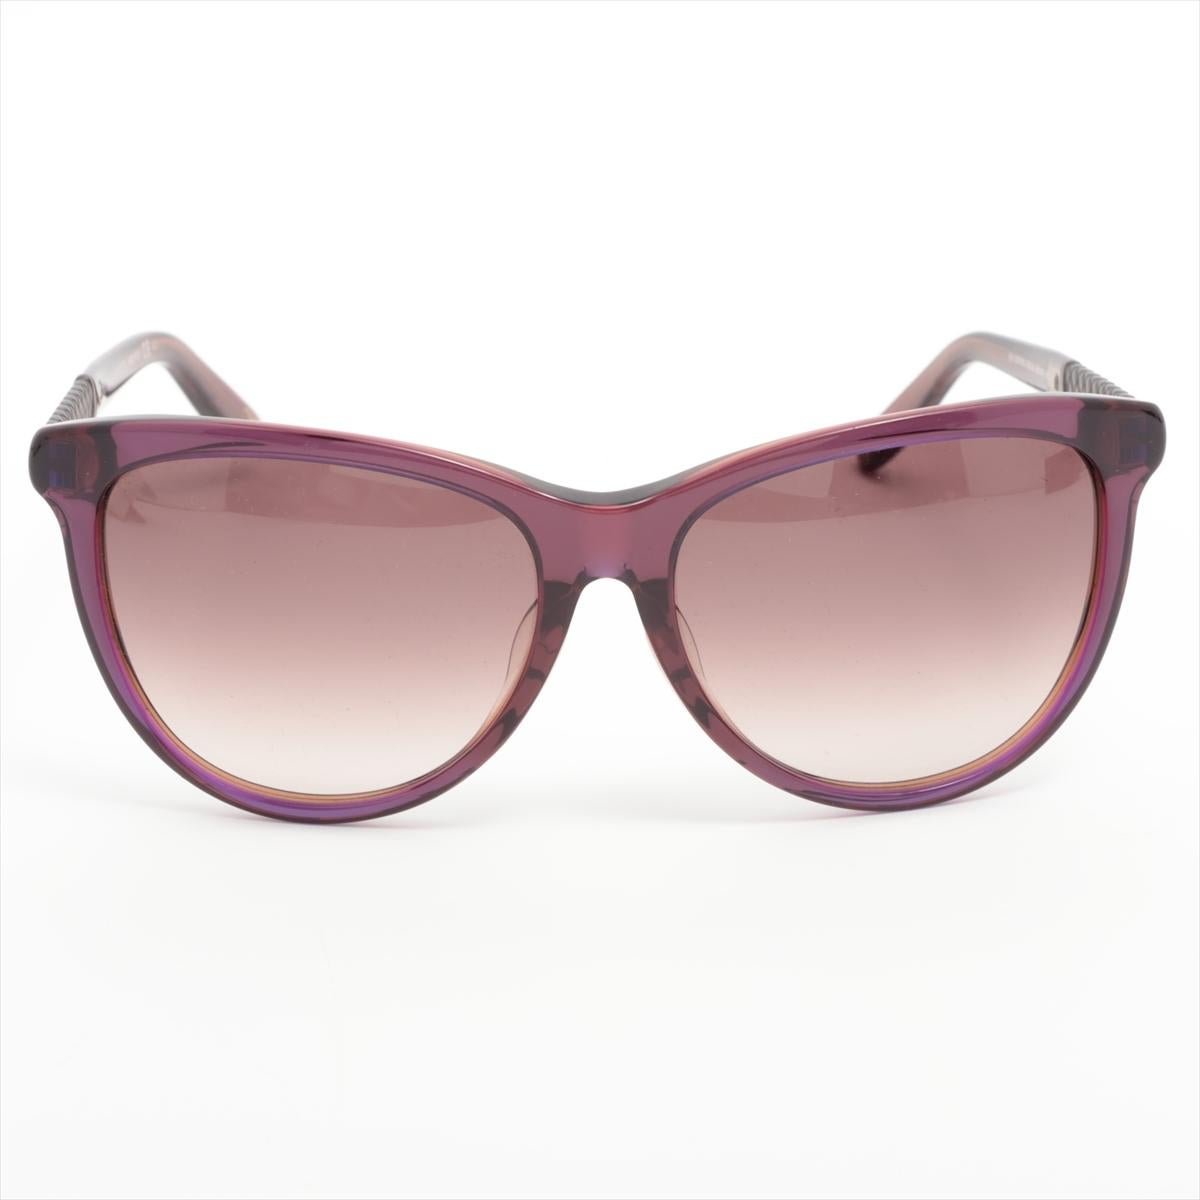 The Bottega Veneta Plastic Sunglasses in Violet are a bold and contemporary eyewear choice that effortlessly blends fashion-forward design with exceptional craftsmanship. Crafted from high-quality plastic, the violet hue adds a vibrant and stylish